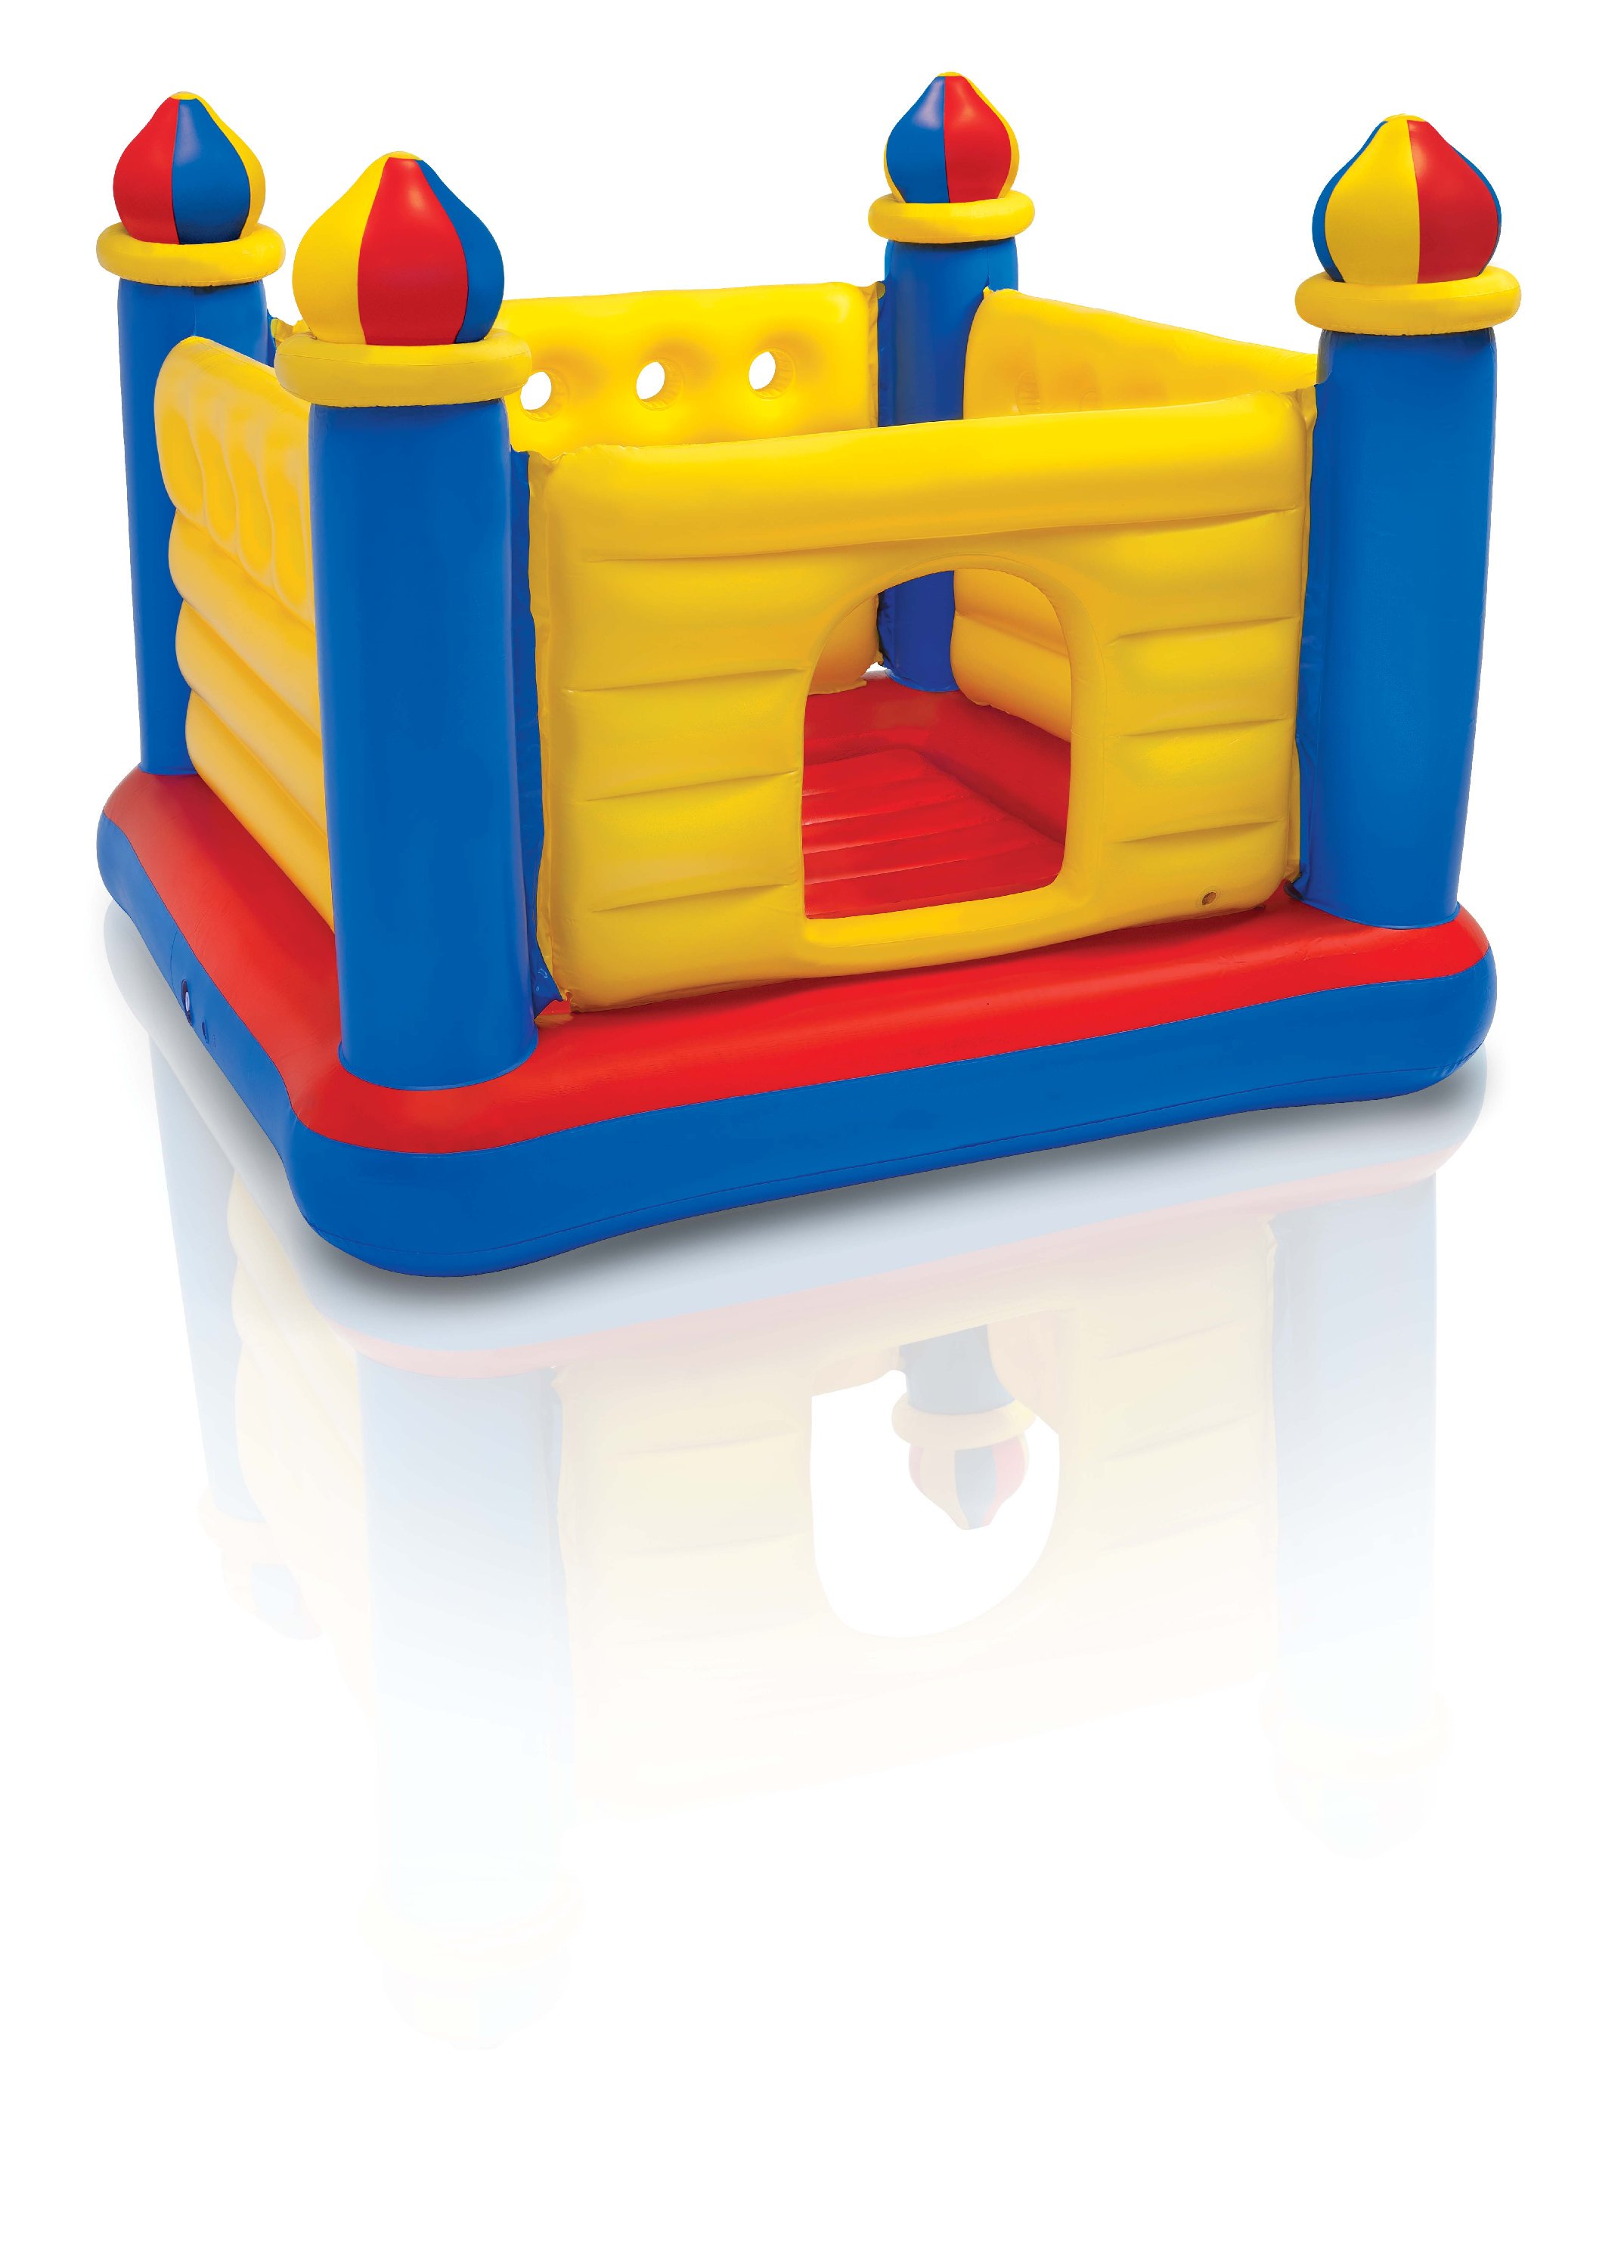 Intex Inflatable Colorful Jump-O-Lene Kids Ball Pit Castle Bouncer for Ages 3-6 - image 3 of 7